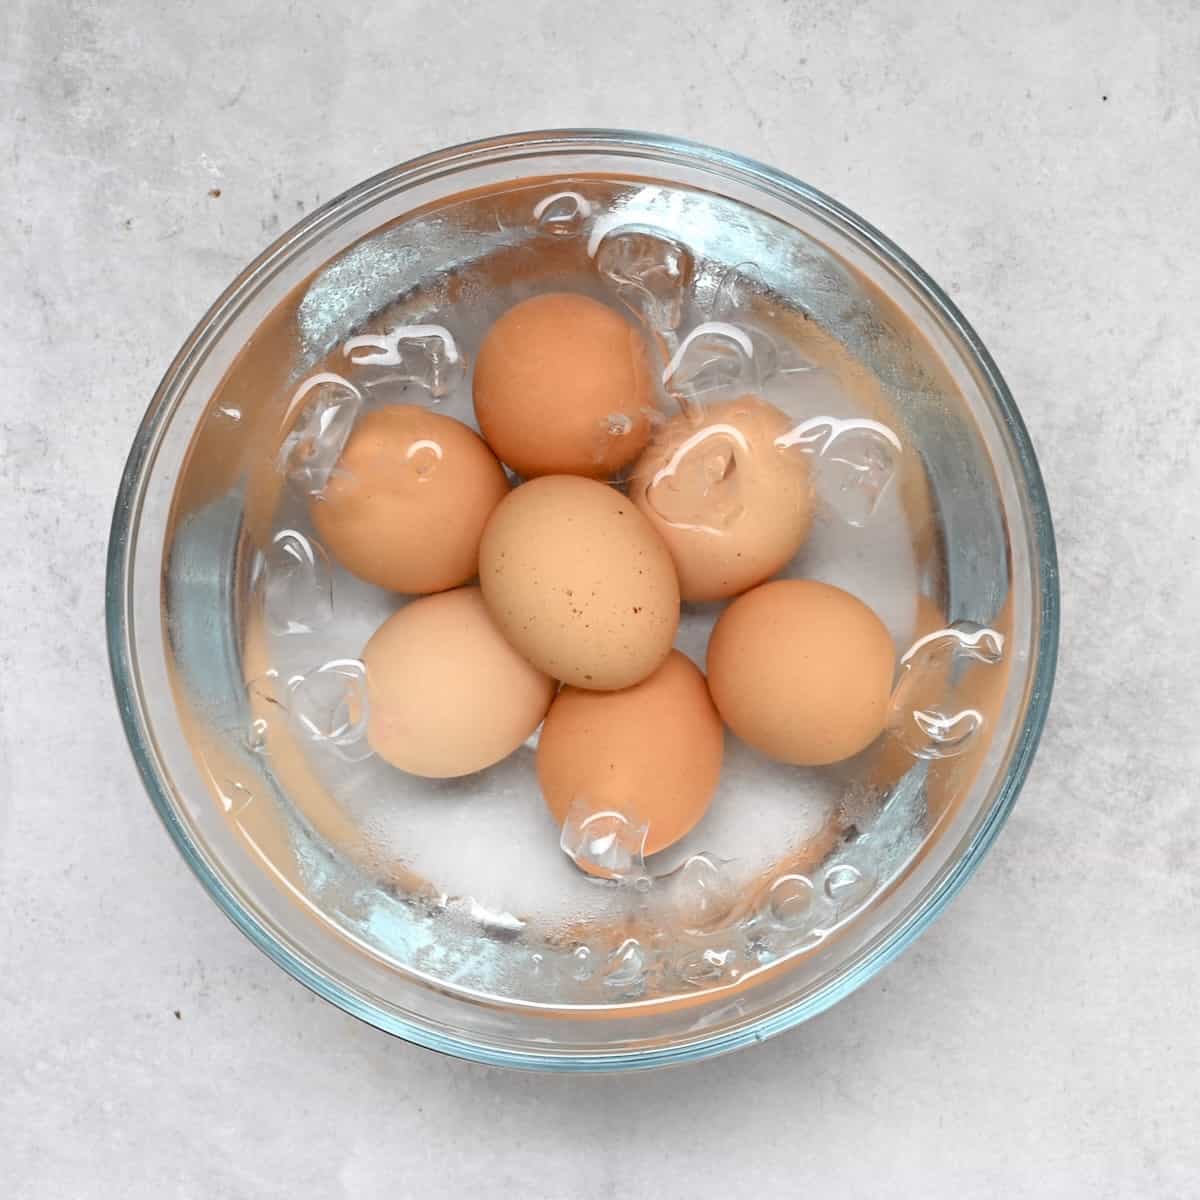 Boiled eggs in a bowl with cold water